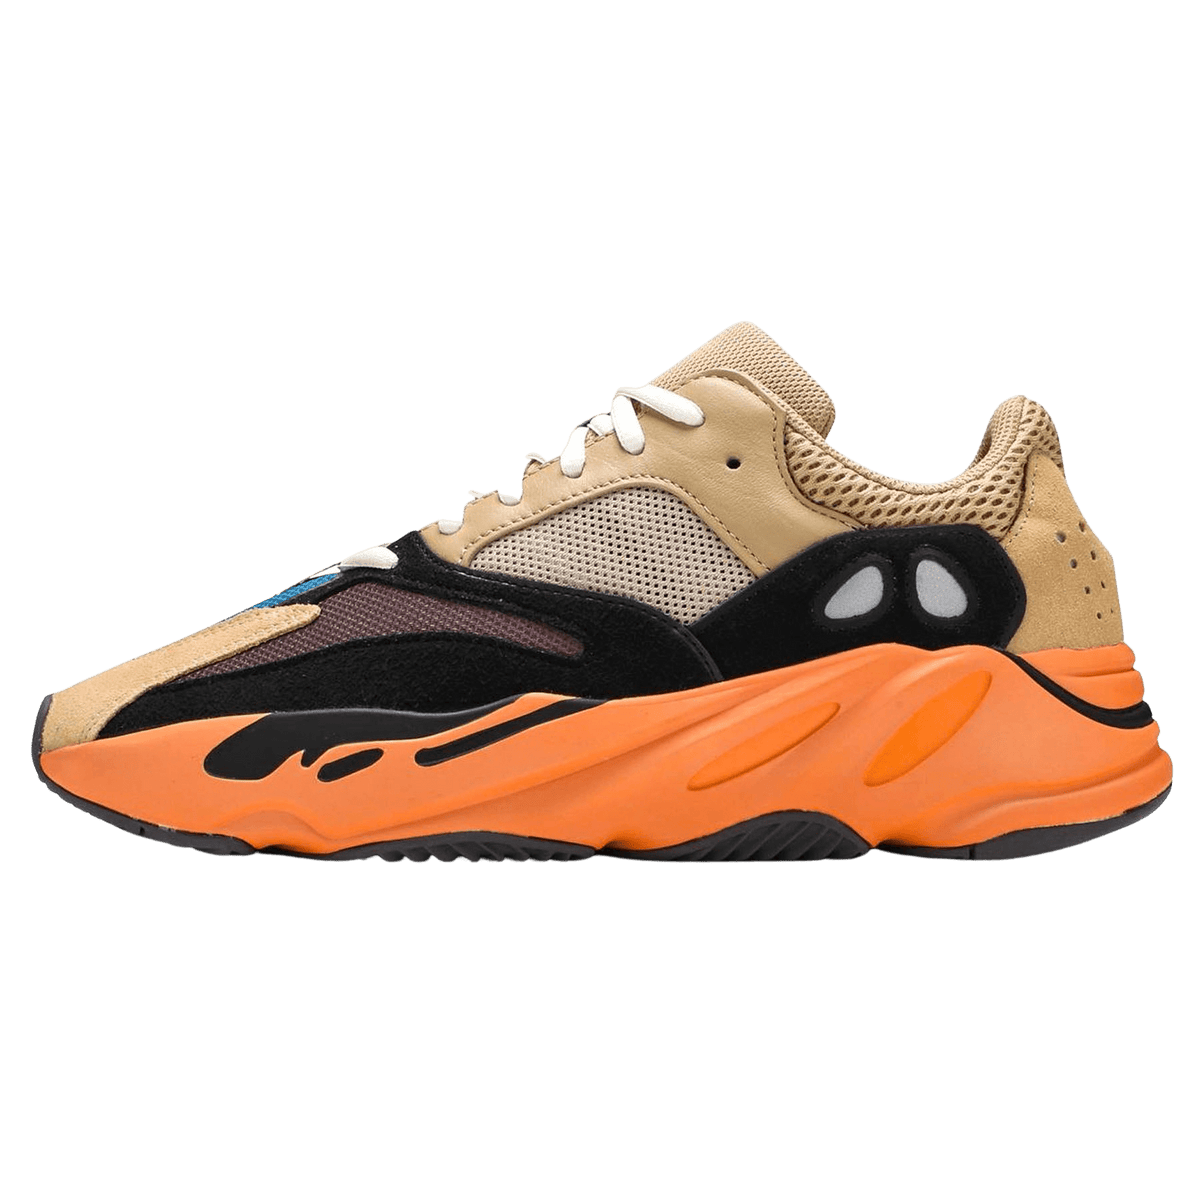 adidas Yeezy Boost 700 ‘Enflame Amber’ - CerbeShops